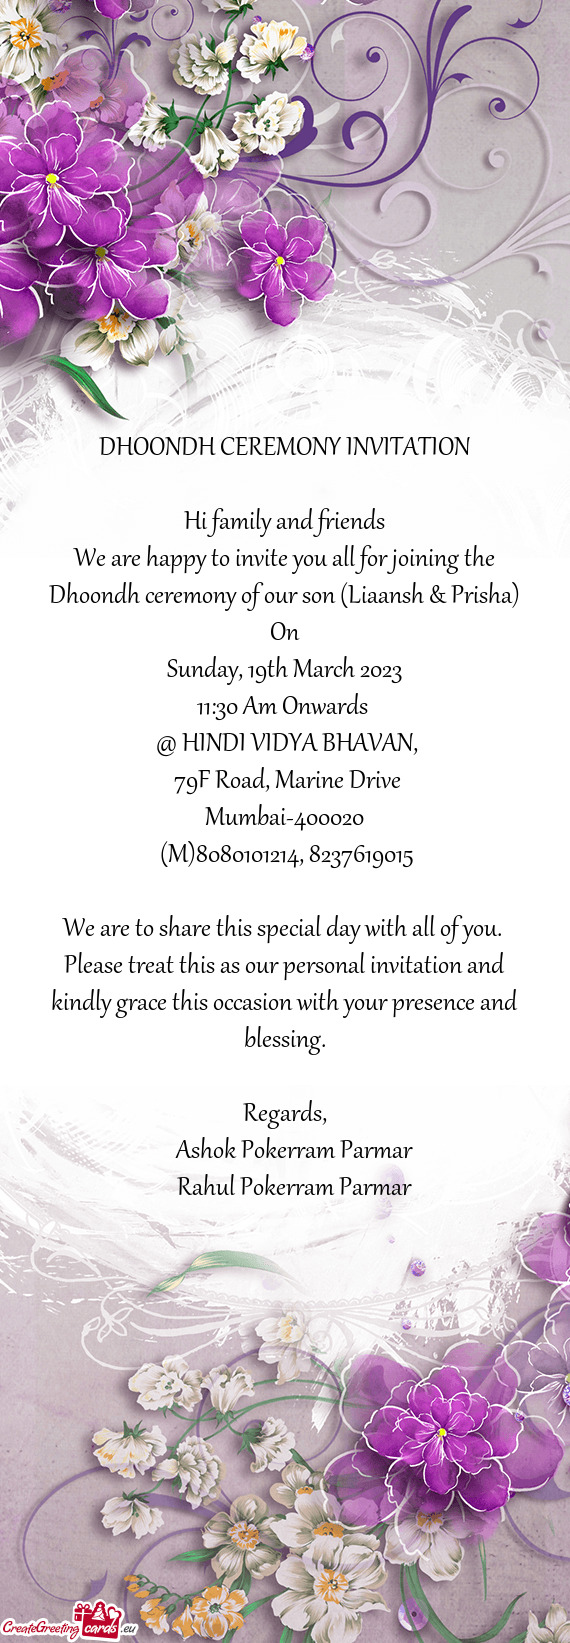 We are happy to invite you all for joining the Dhoondh ceremony of our son (Liaansh & Prisha)